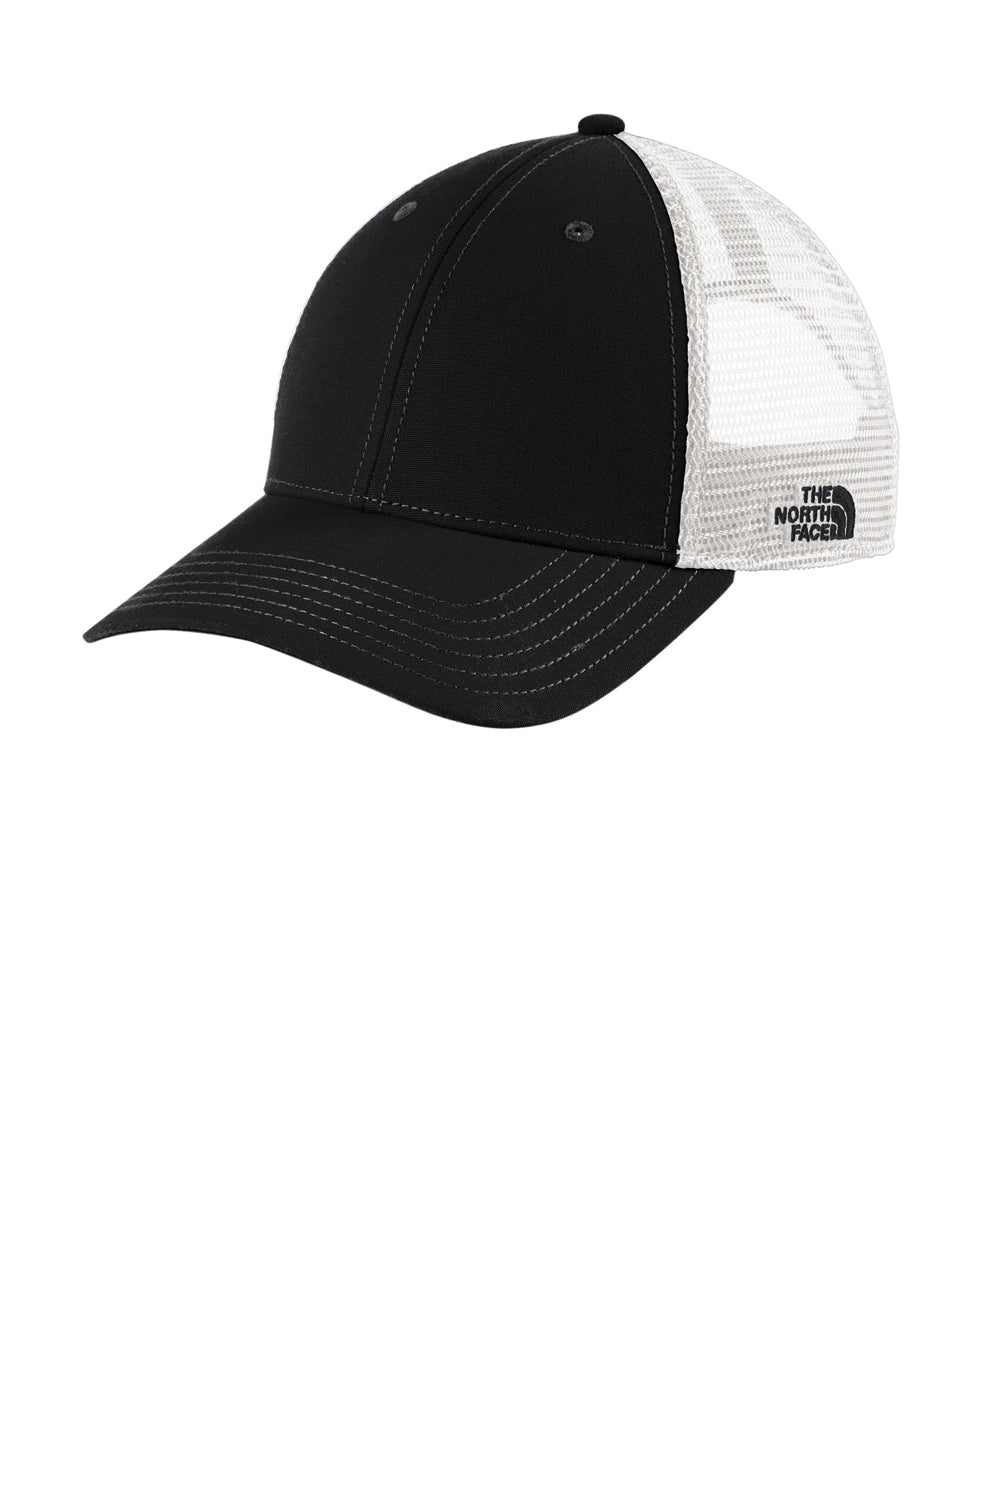 The North Face NF0A4VUA Ultimate Trucker Hat Black/White Front